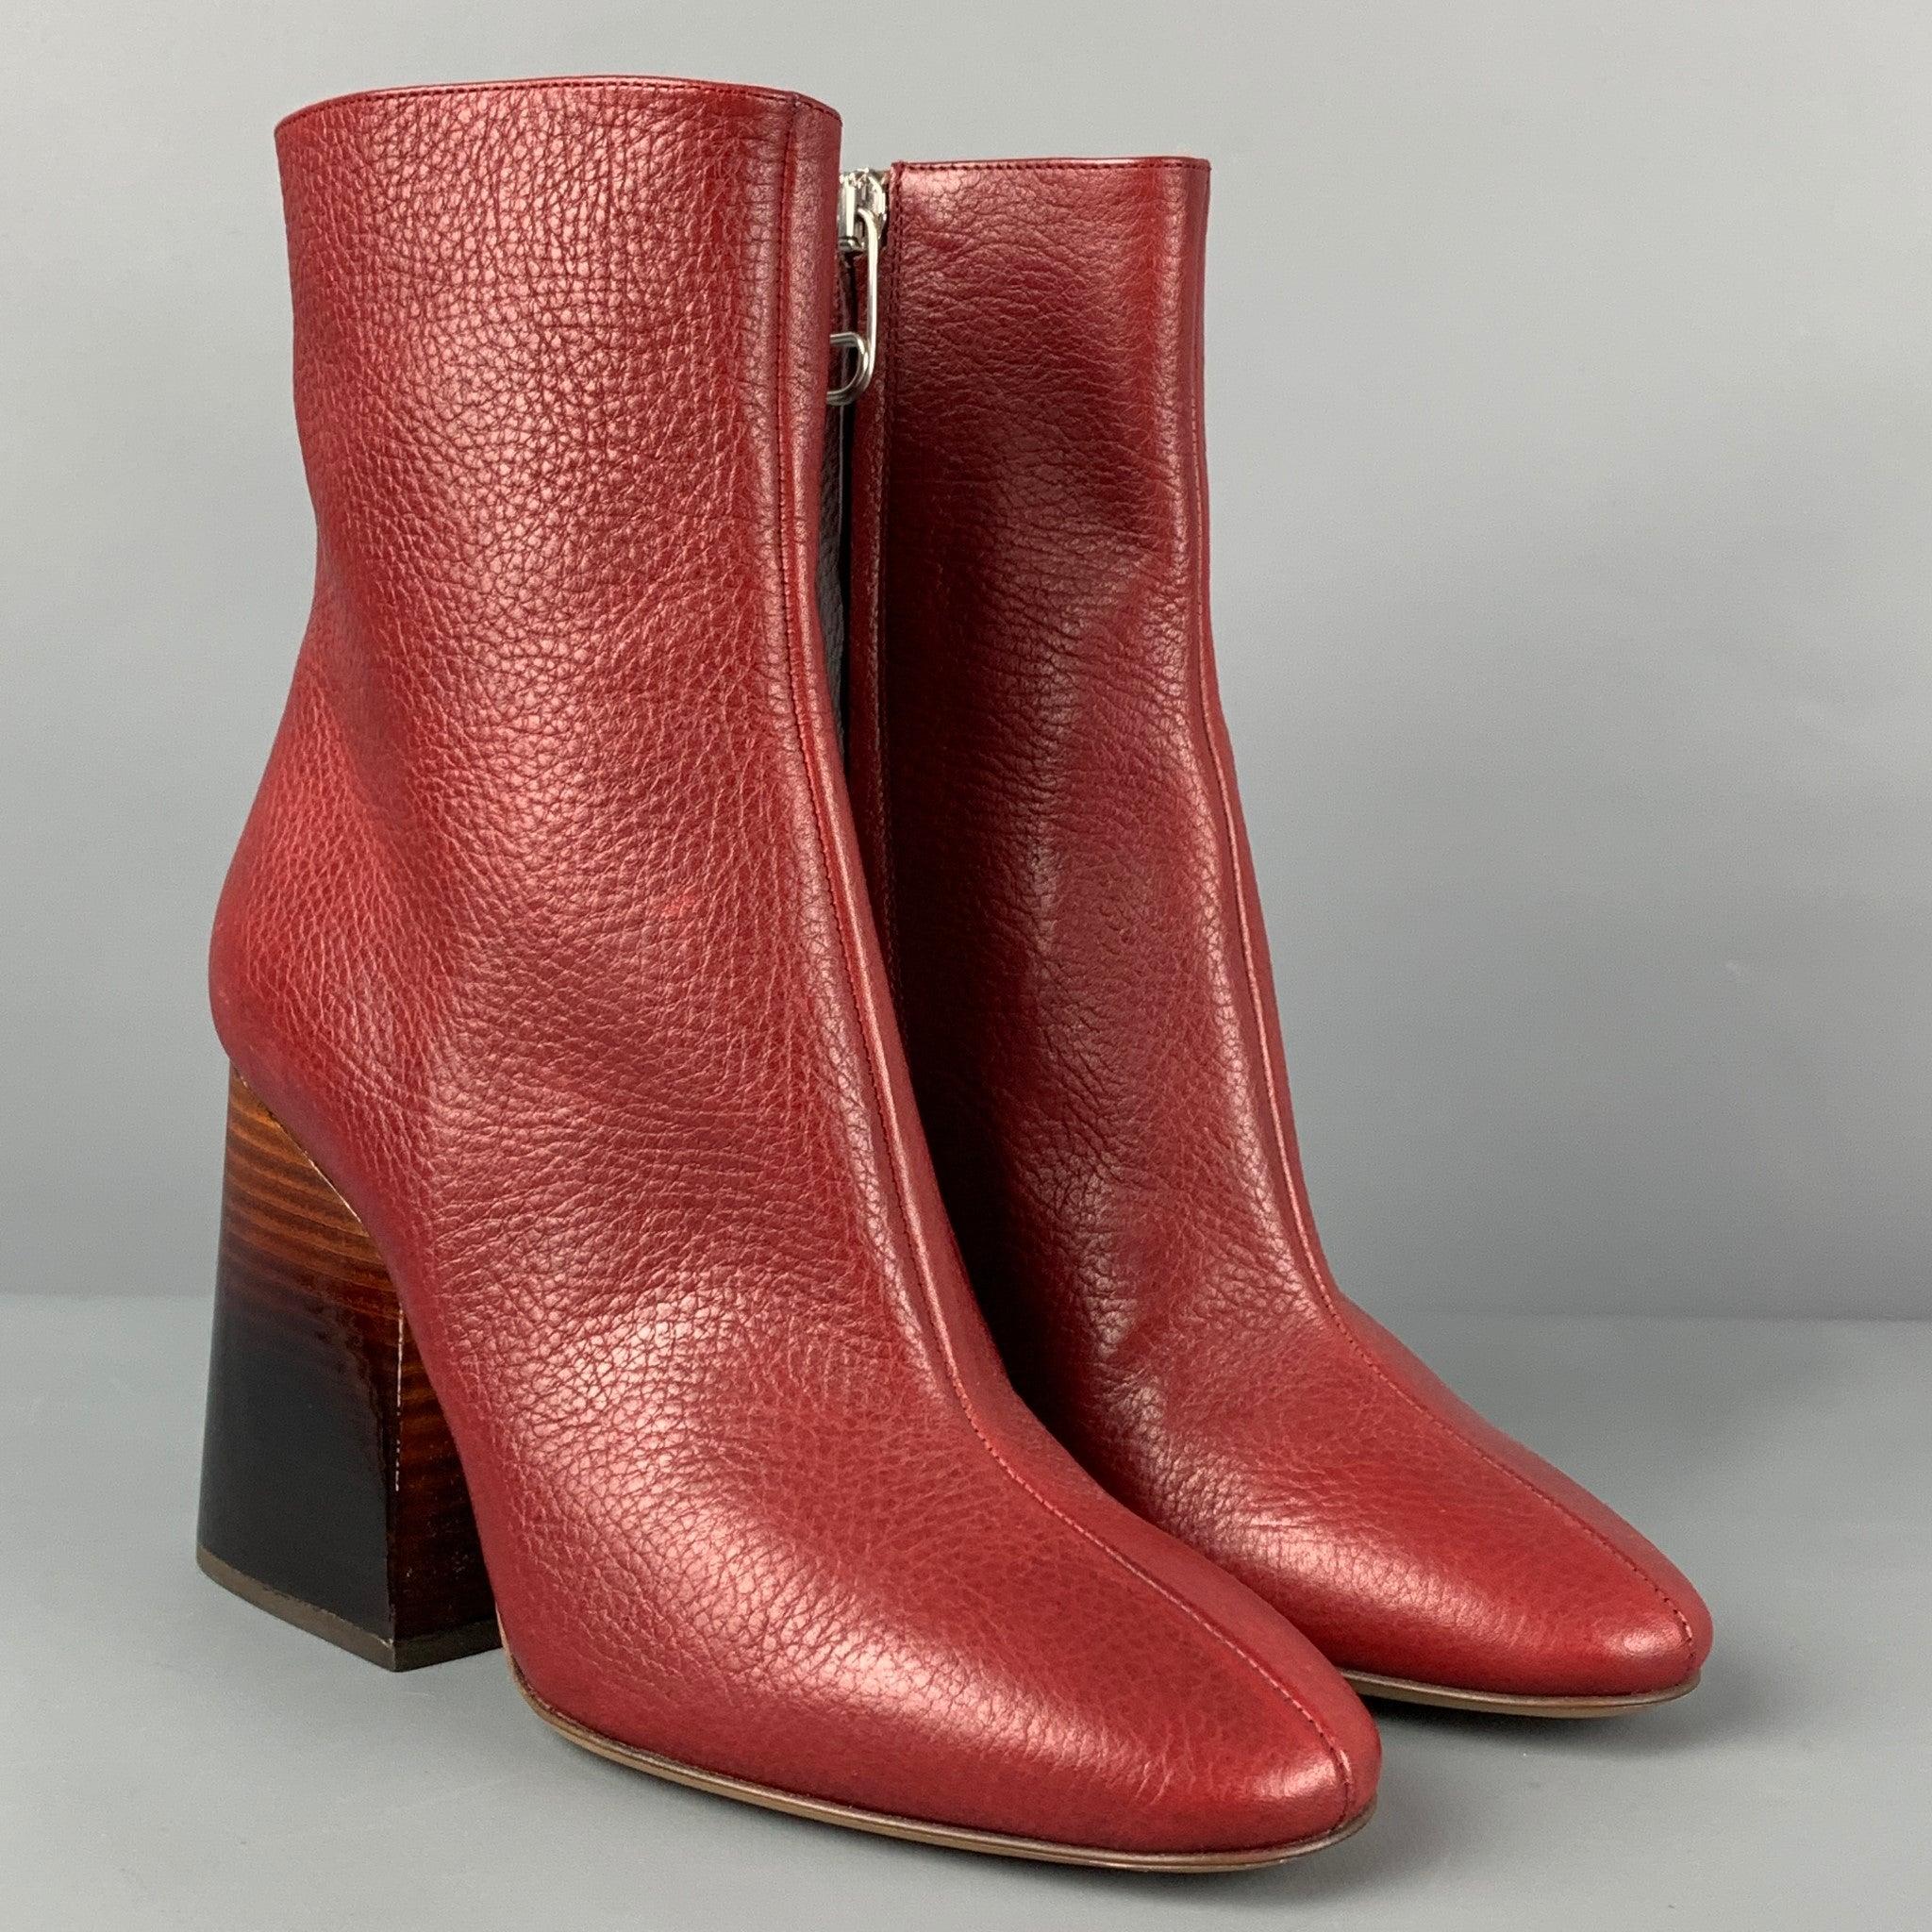 MAISON MARTIN MARGIELA boots comes in a red pebble grain leather featuring a side zipper closure and a ombre chunky heel. Made in Italy.
 New With Box.
  
 

 Marked:  36 
 

 Measurements: 
  Heel: 3.5 inches 
  
  
  
 Sui Generis Reference: